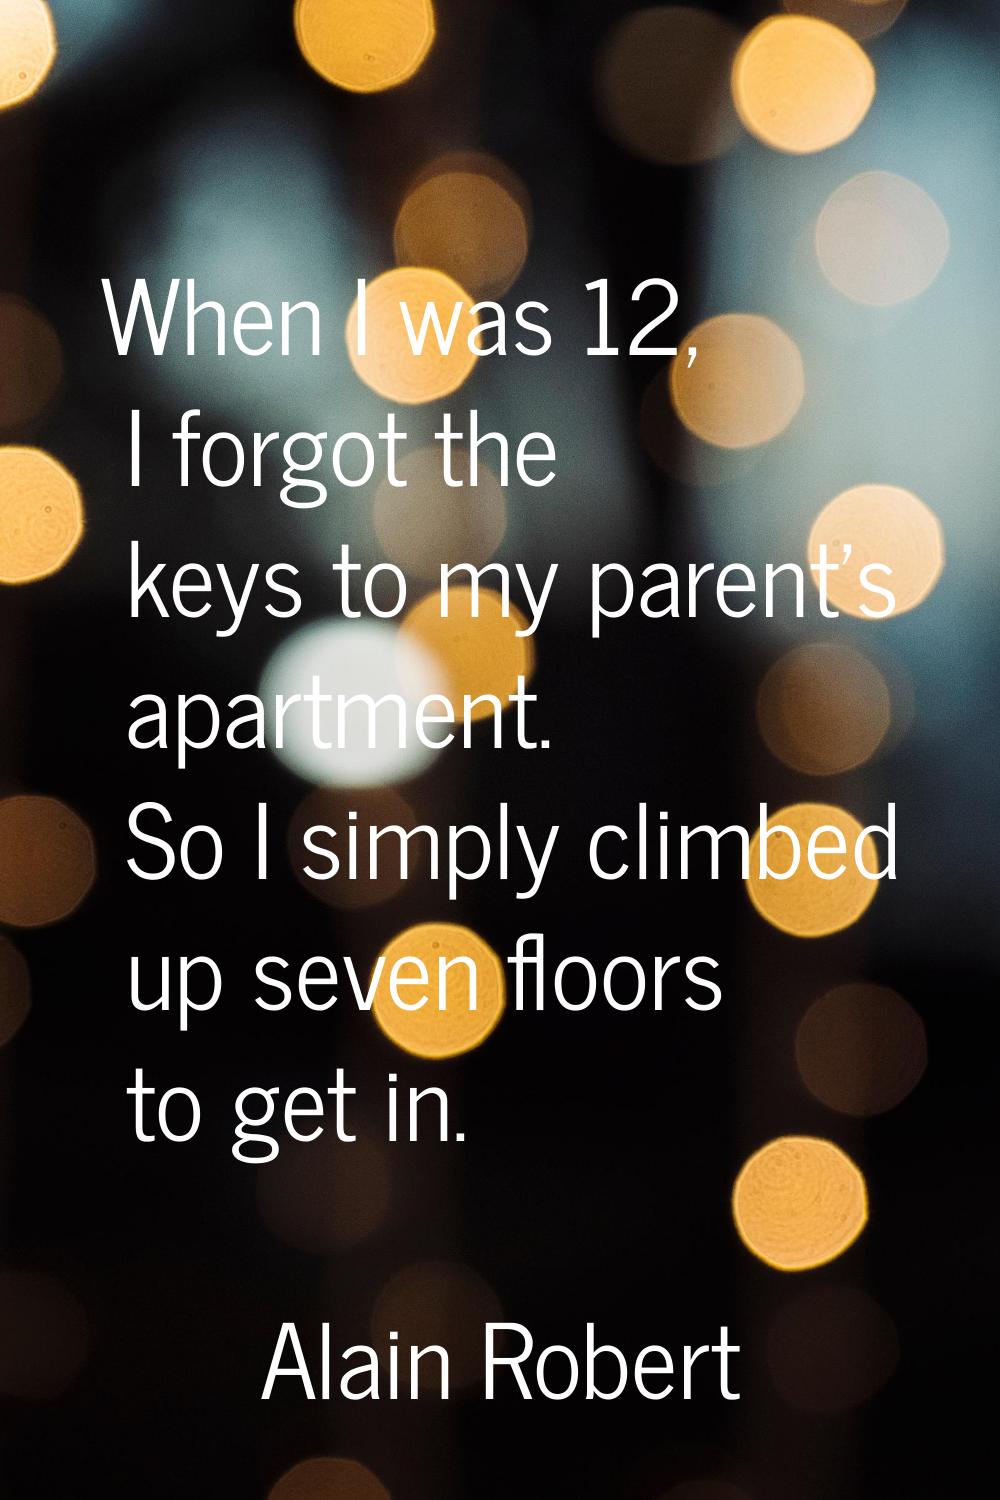 When I was 12, I forgot the keys to my parent's apartment. So I simply climbed up seven floors to g